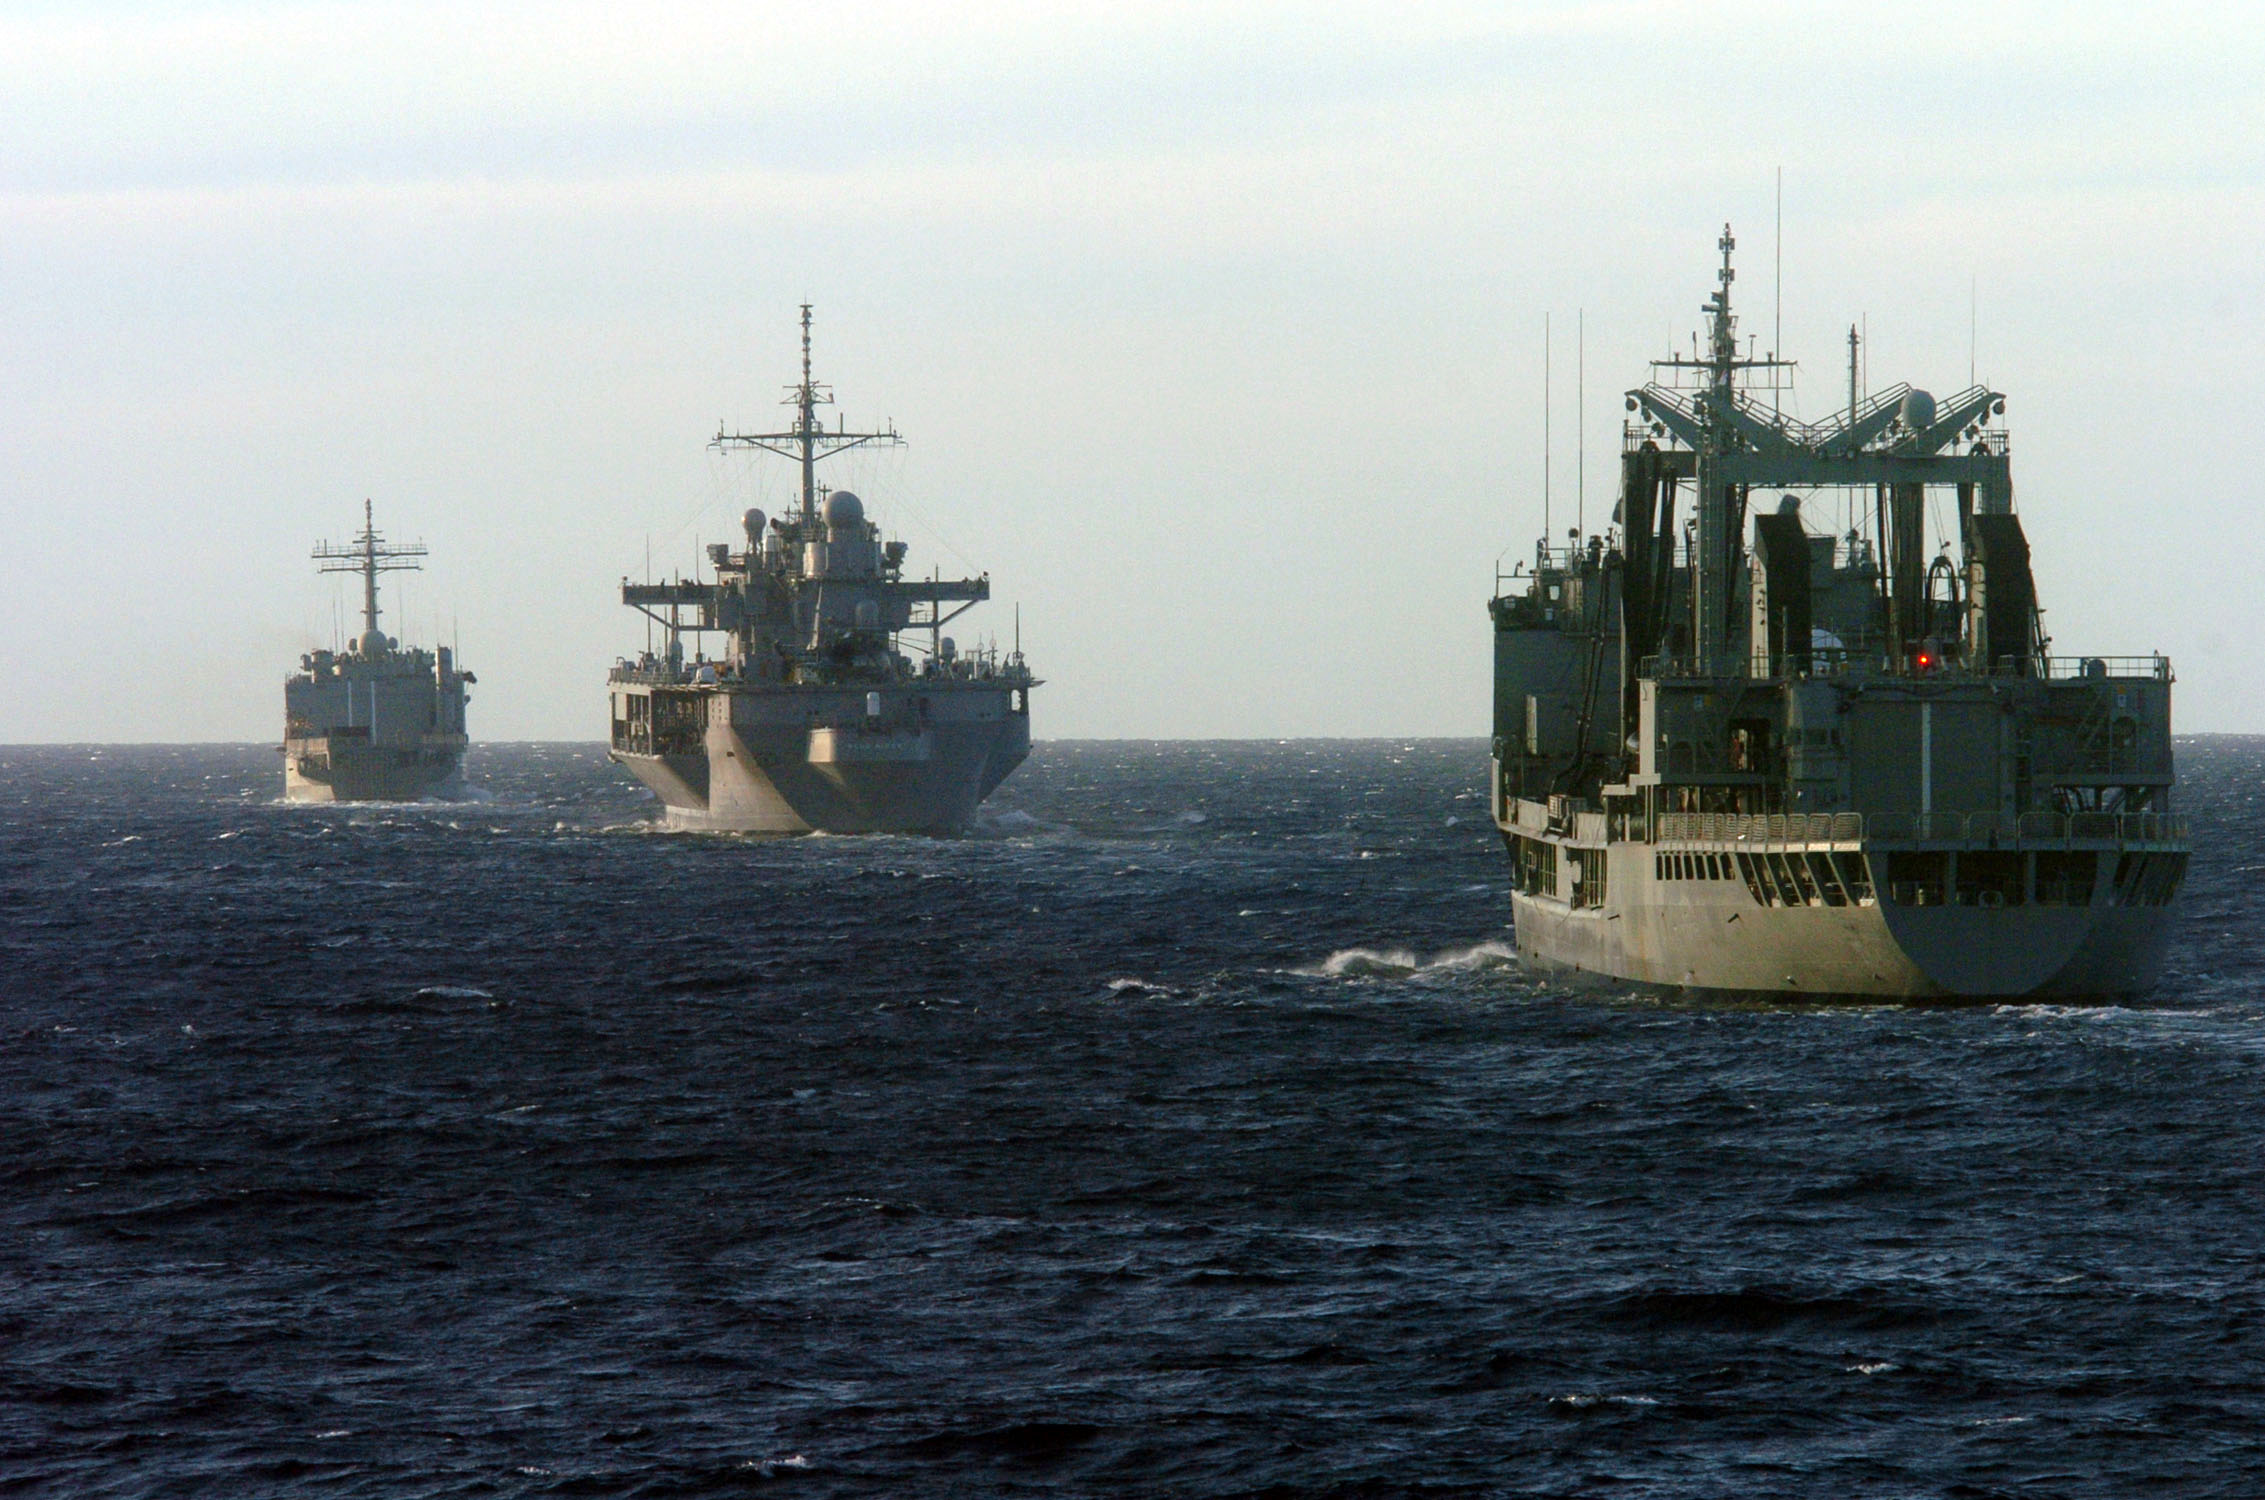 US_Navy_050610-N-0421S-129_Royal_Australian_Navy_ships_and_the_amphibious_command_ship_USS_Blue_Ridge_(LCC_19)_participate_in_a_maneuvering_exercise_during_Talisman_Sabre_2005.jpg